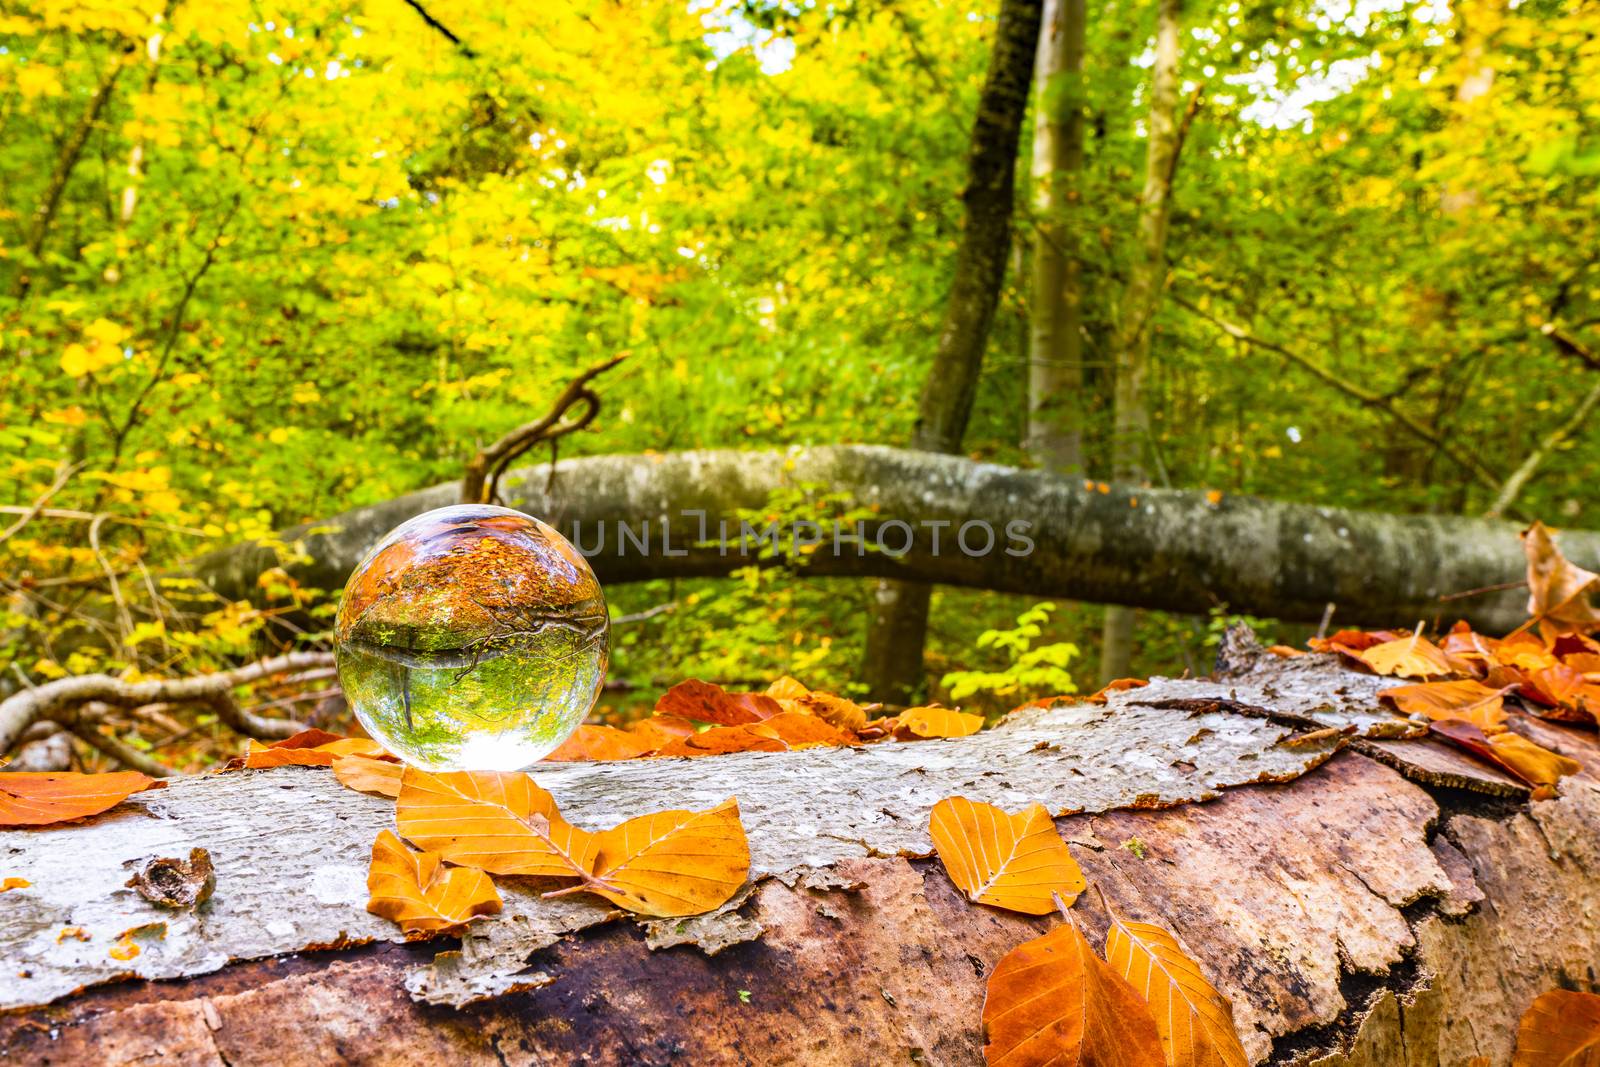 Crystal ball on a wooden log in a forest with autumn leaves in the fall